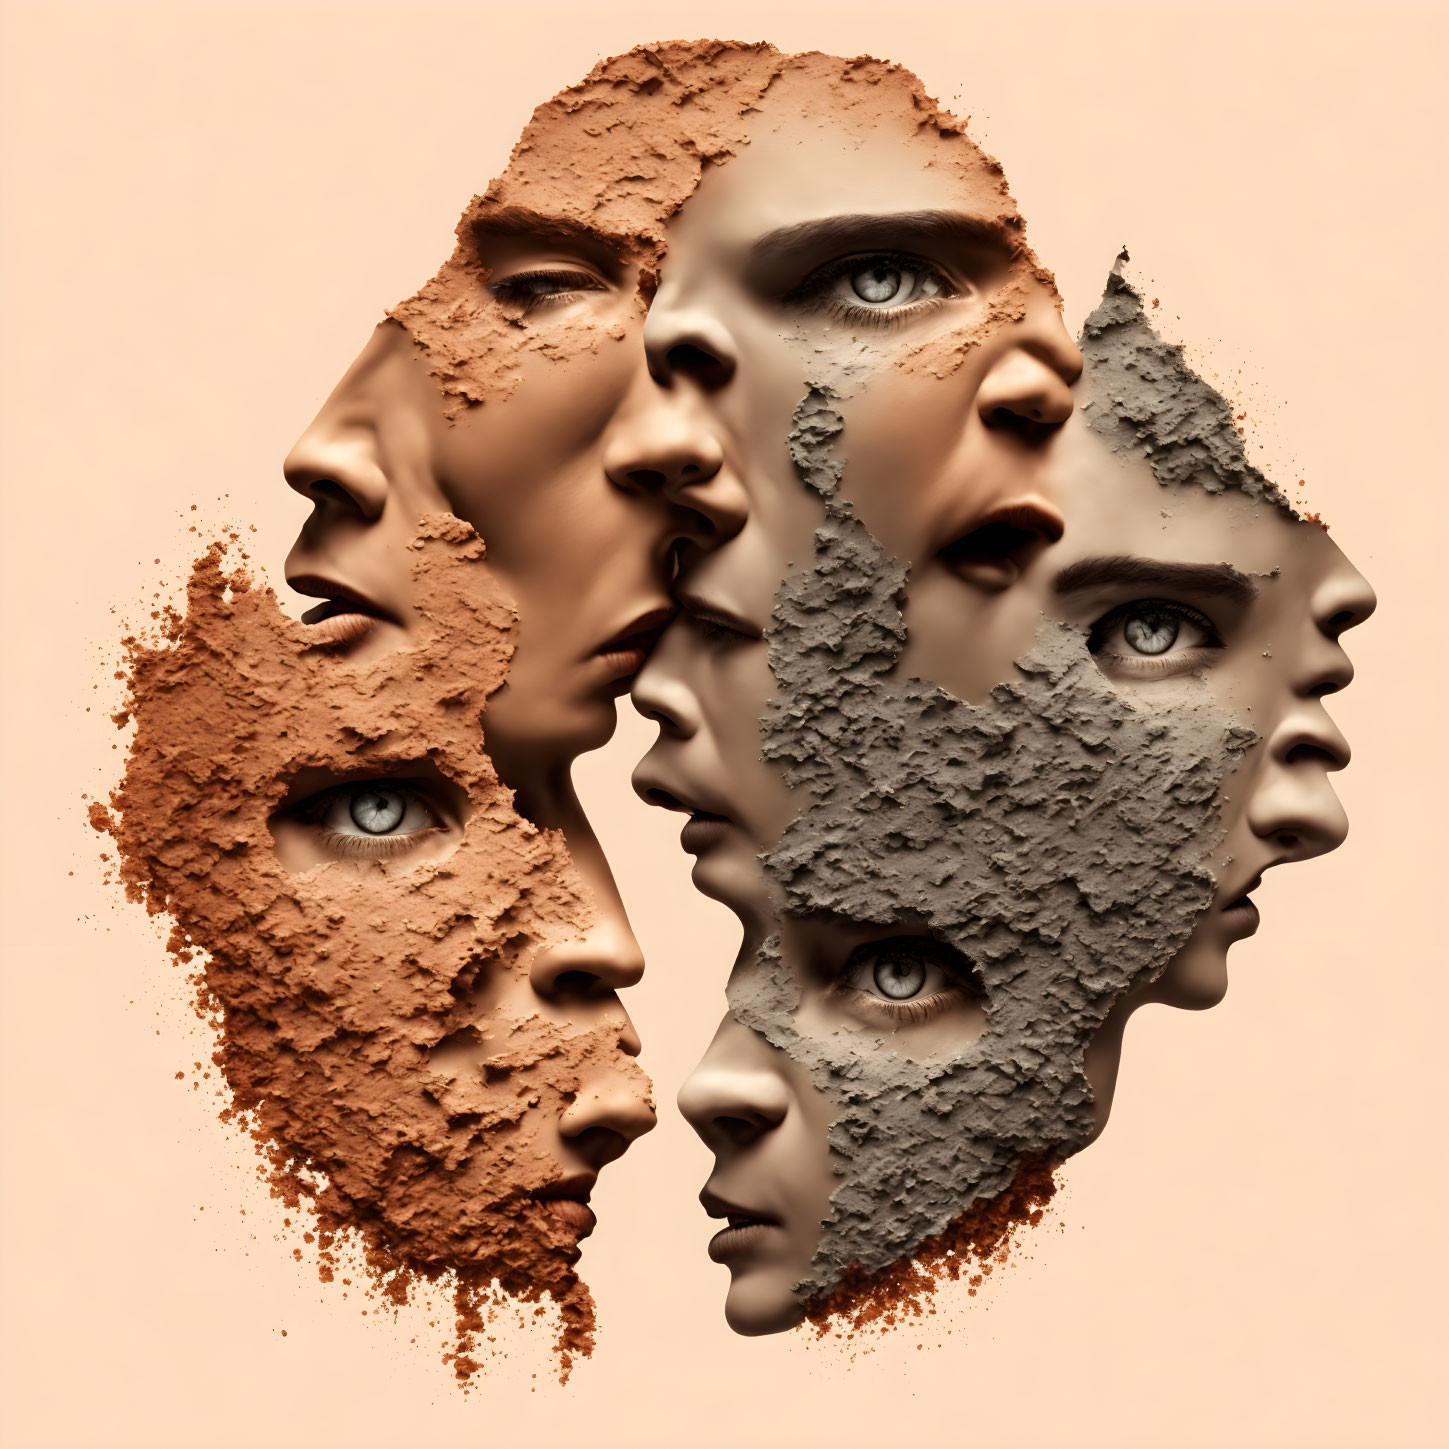 Abstract Human Faces Profile and Frontal View in Earth Tones on Neutral Background